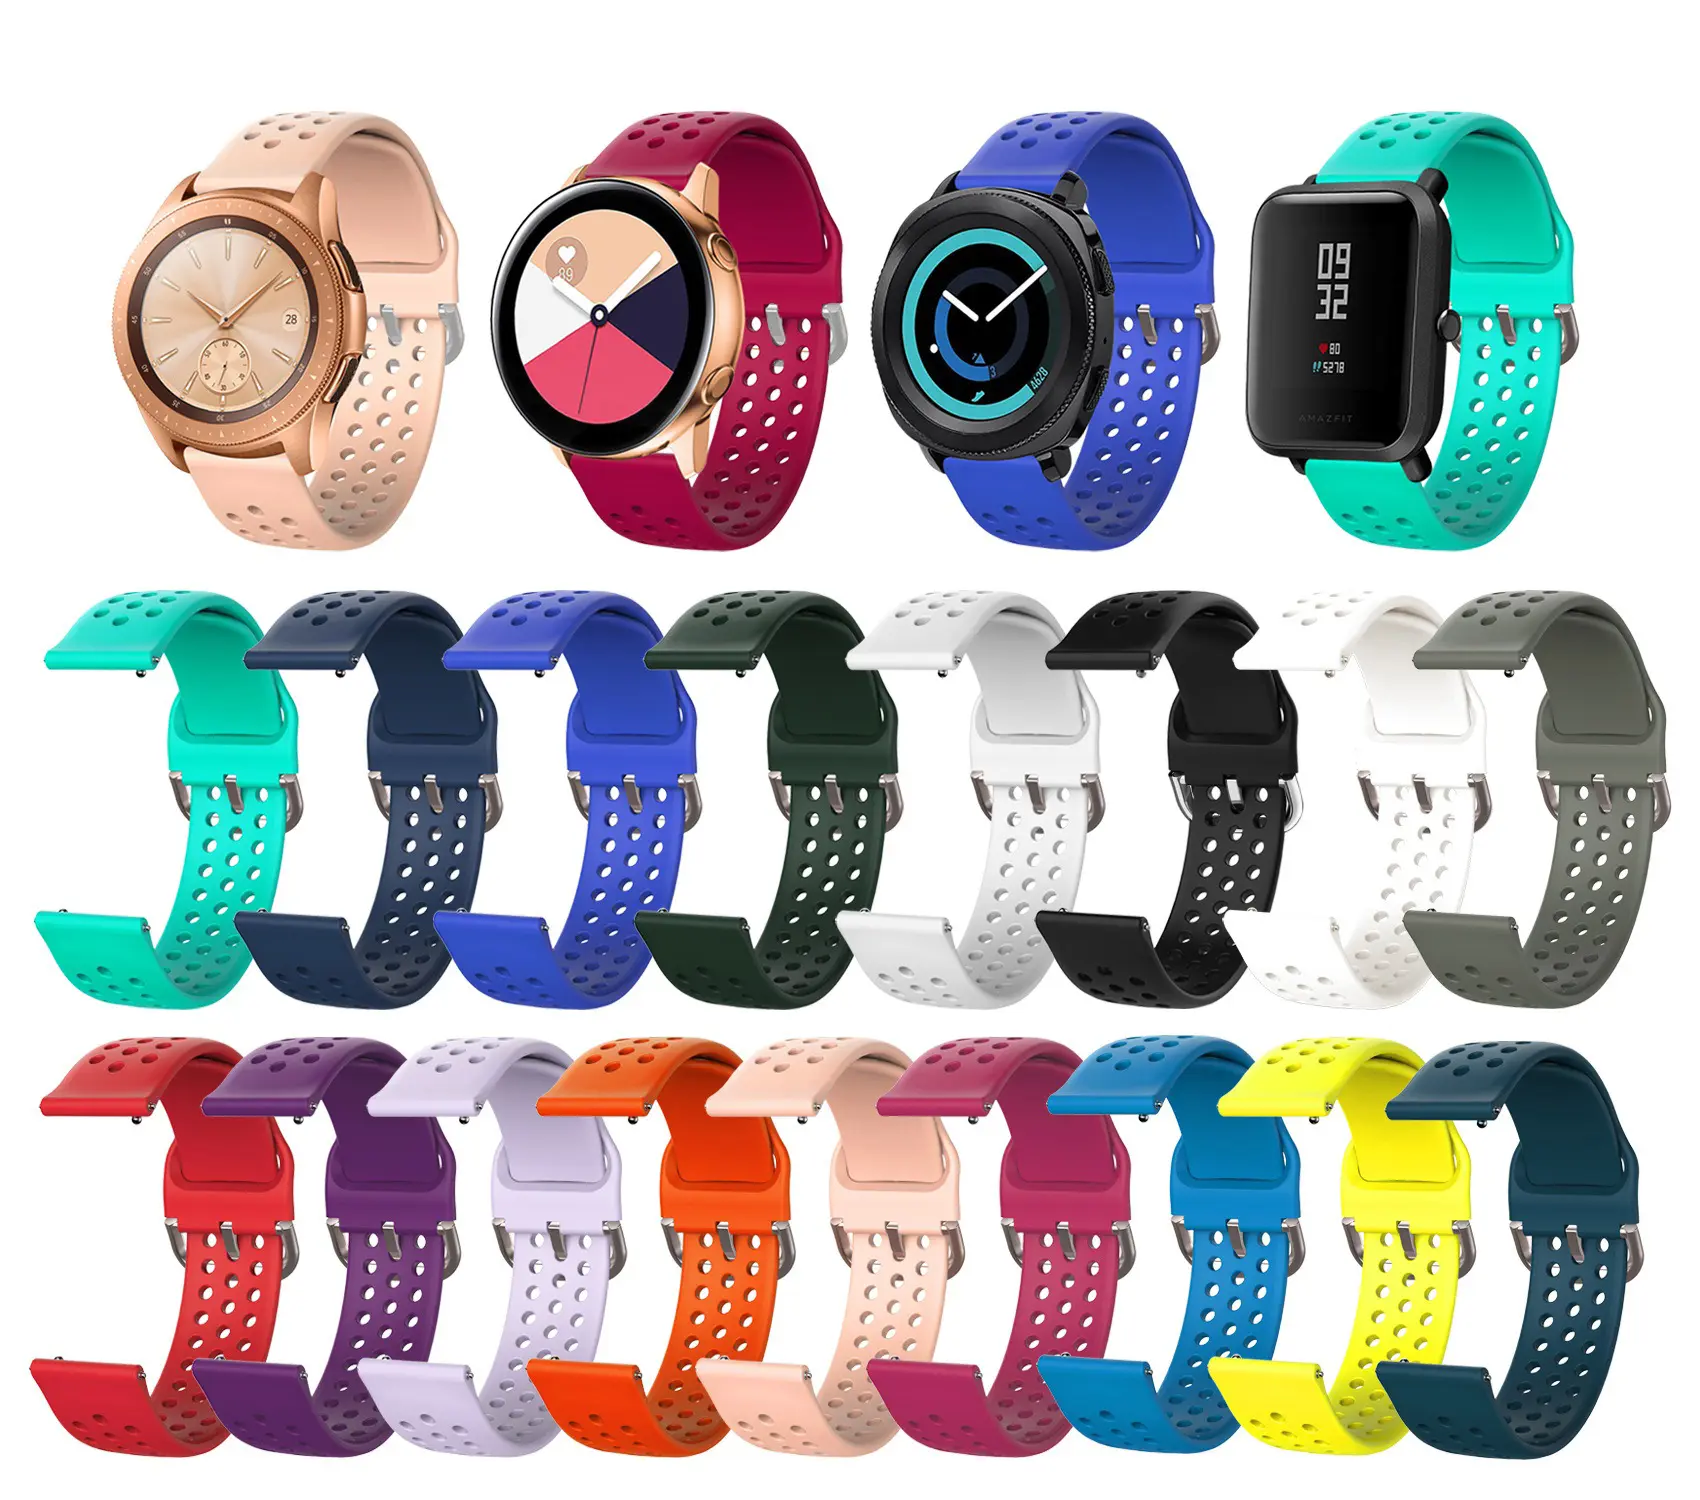 Sport Breathable Silicone Band Strap For Apple Watch Series 6 5 4 3 2 1 SE 44mm 40mm 42mm 38mm Samsung Huawei Amazfit 20mm 22mm